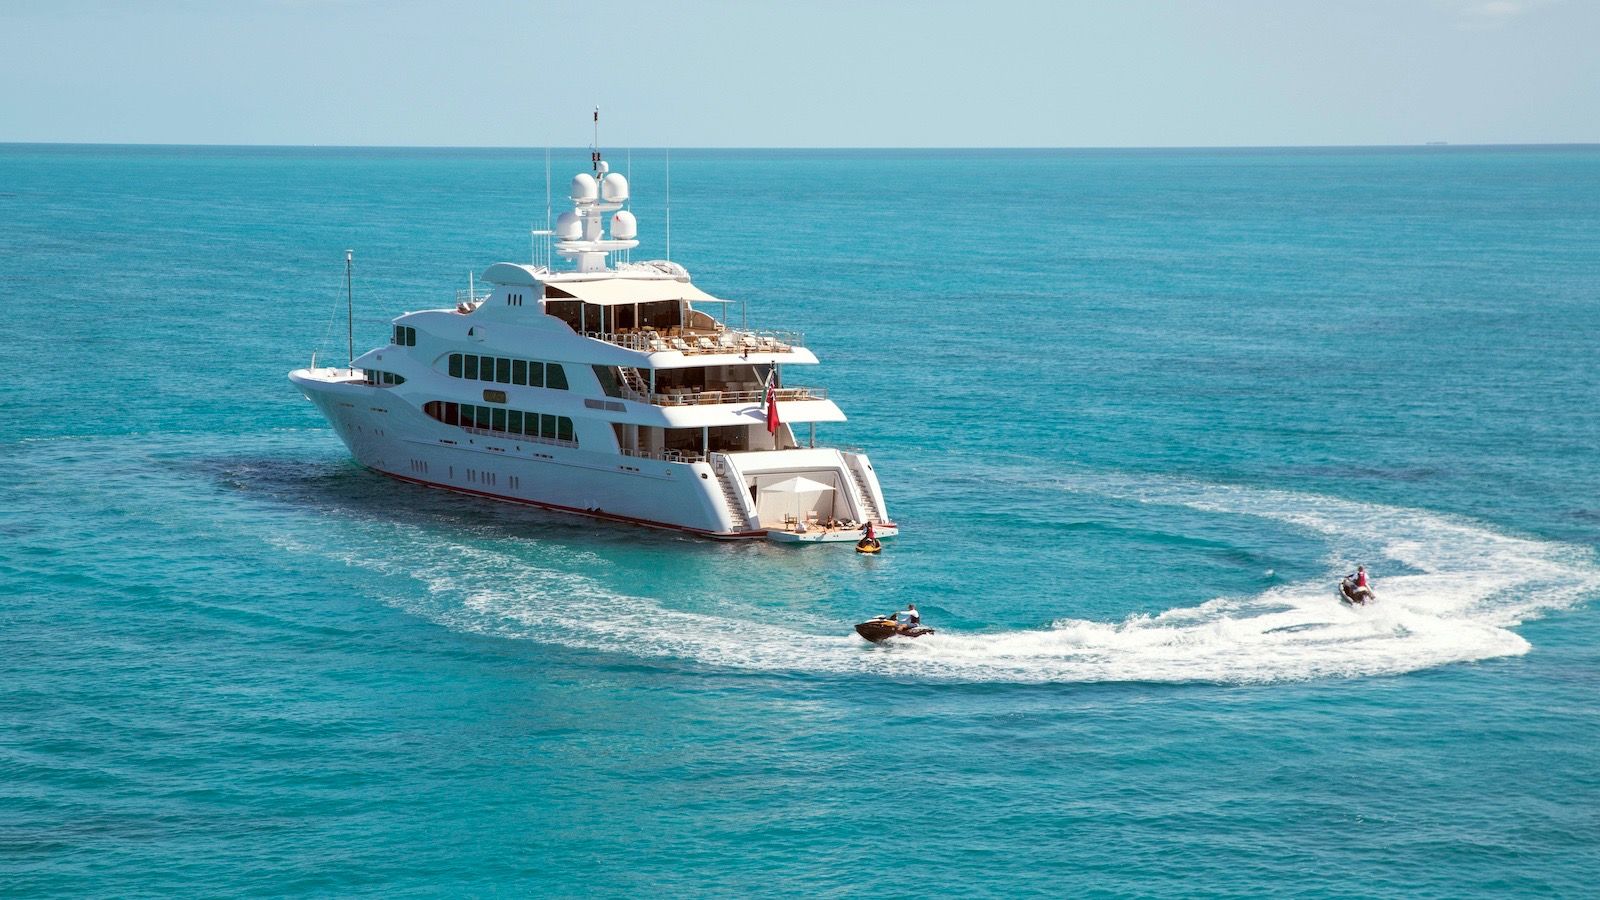 St Barts Luxury Yacht Charter Guide - IYC